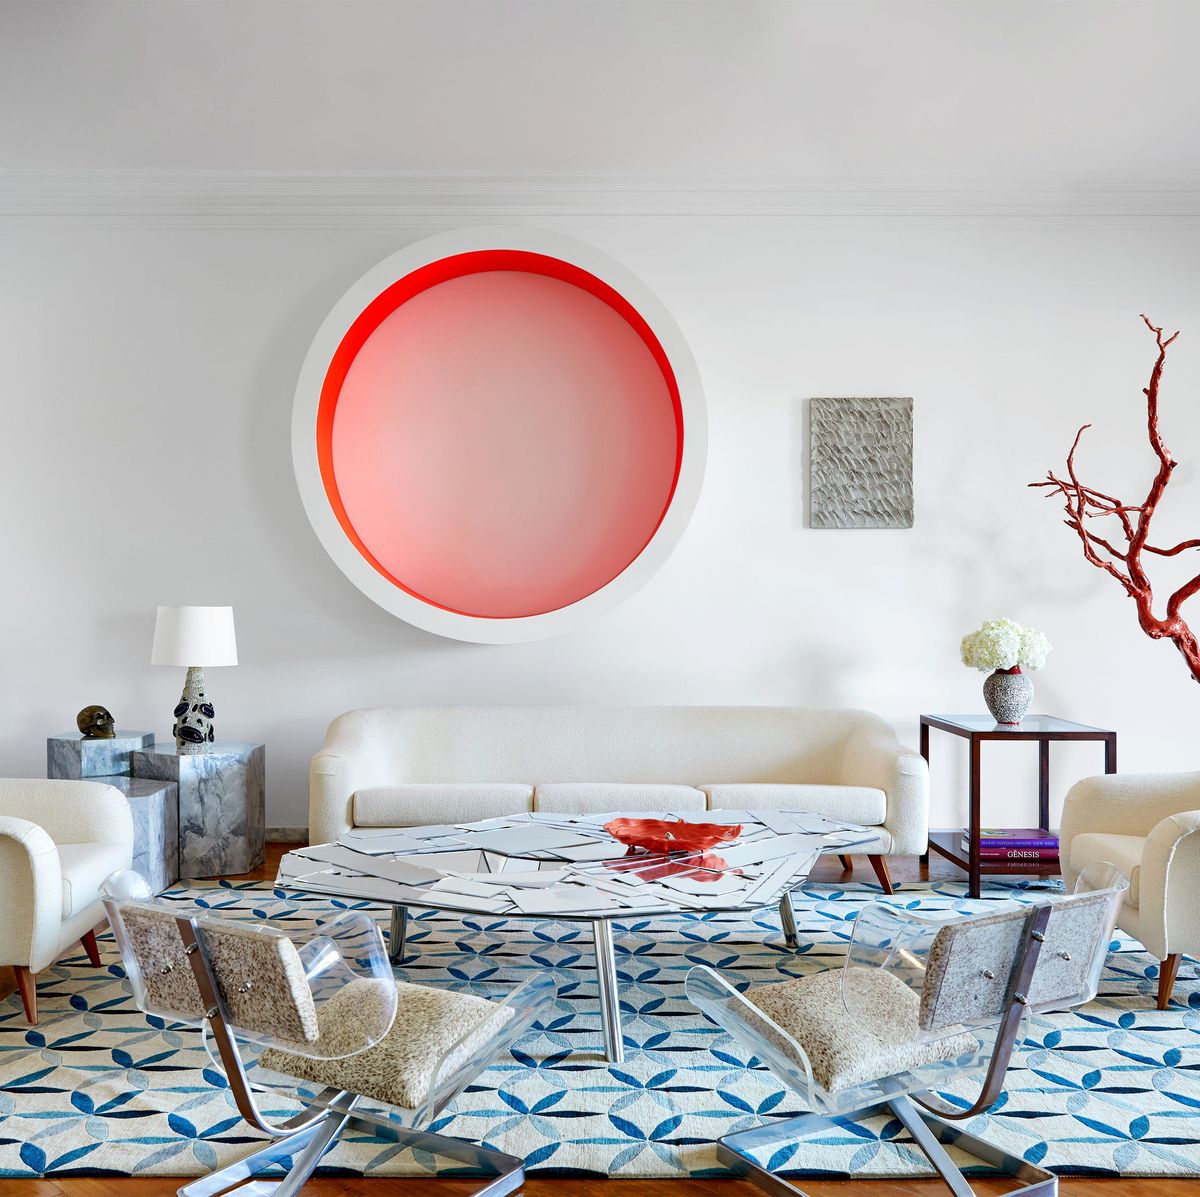 Dining area with a white round table and chair sofa in the center and a large round pink and white artwork on the wall